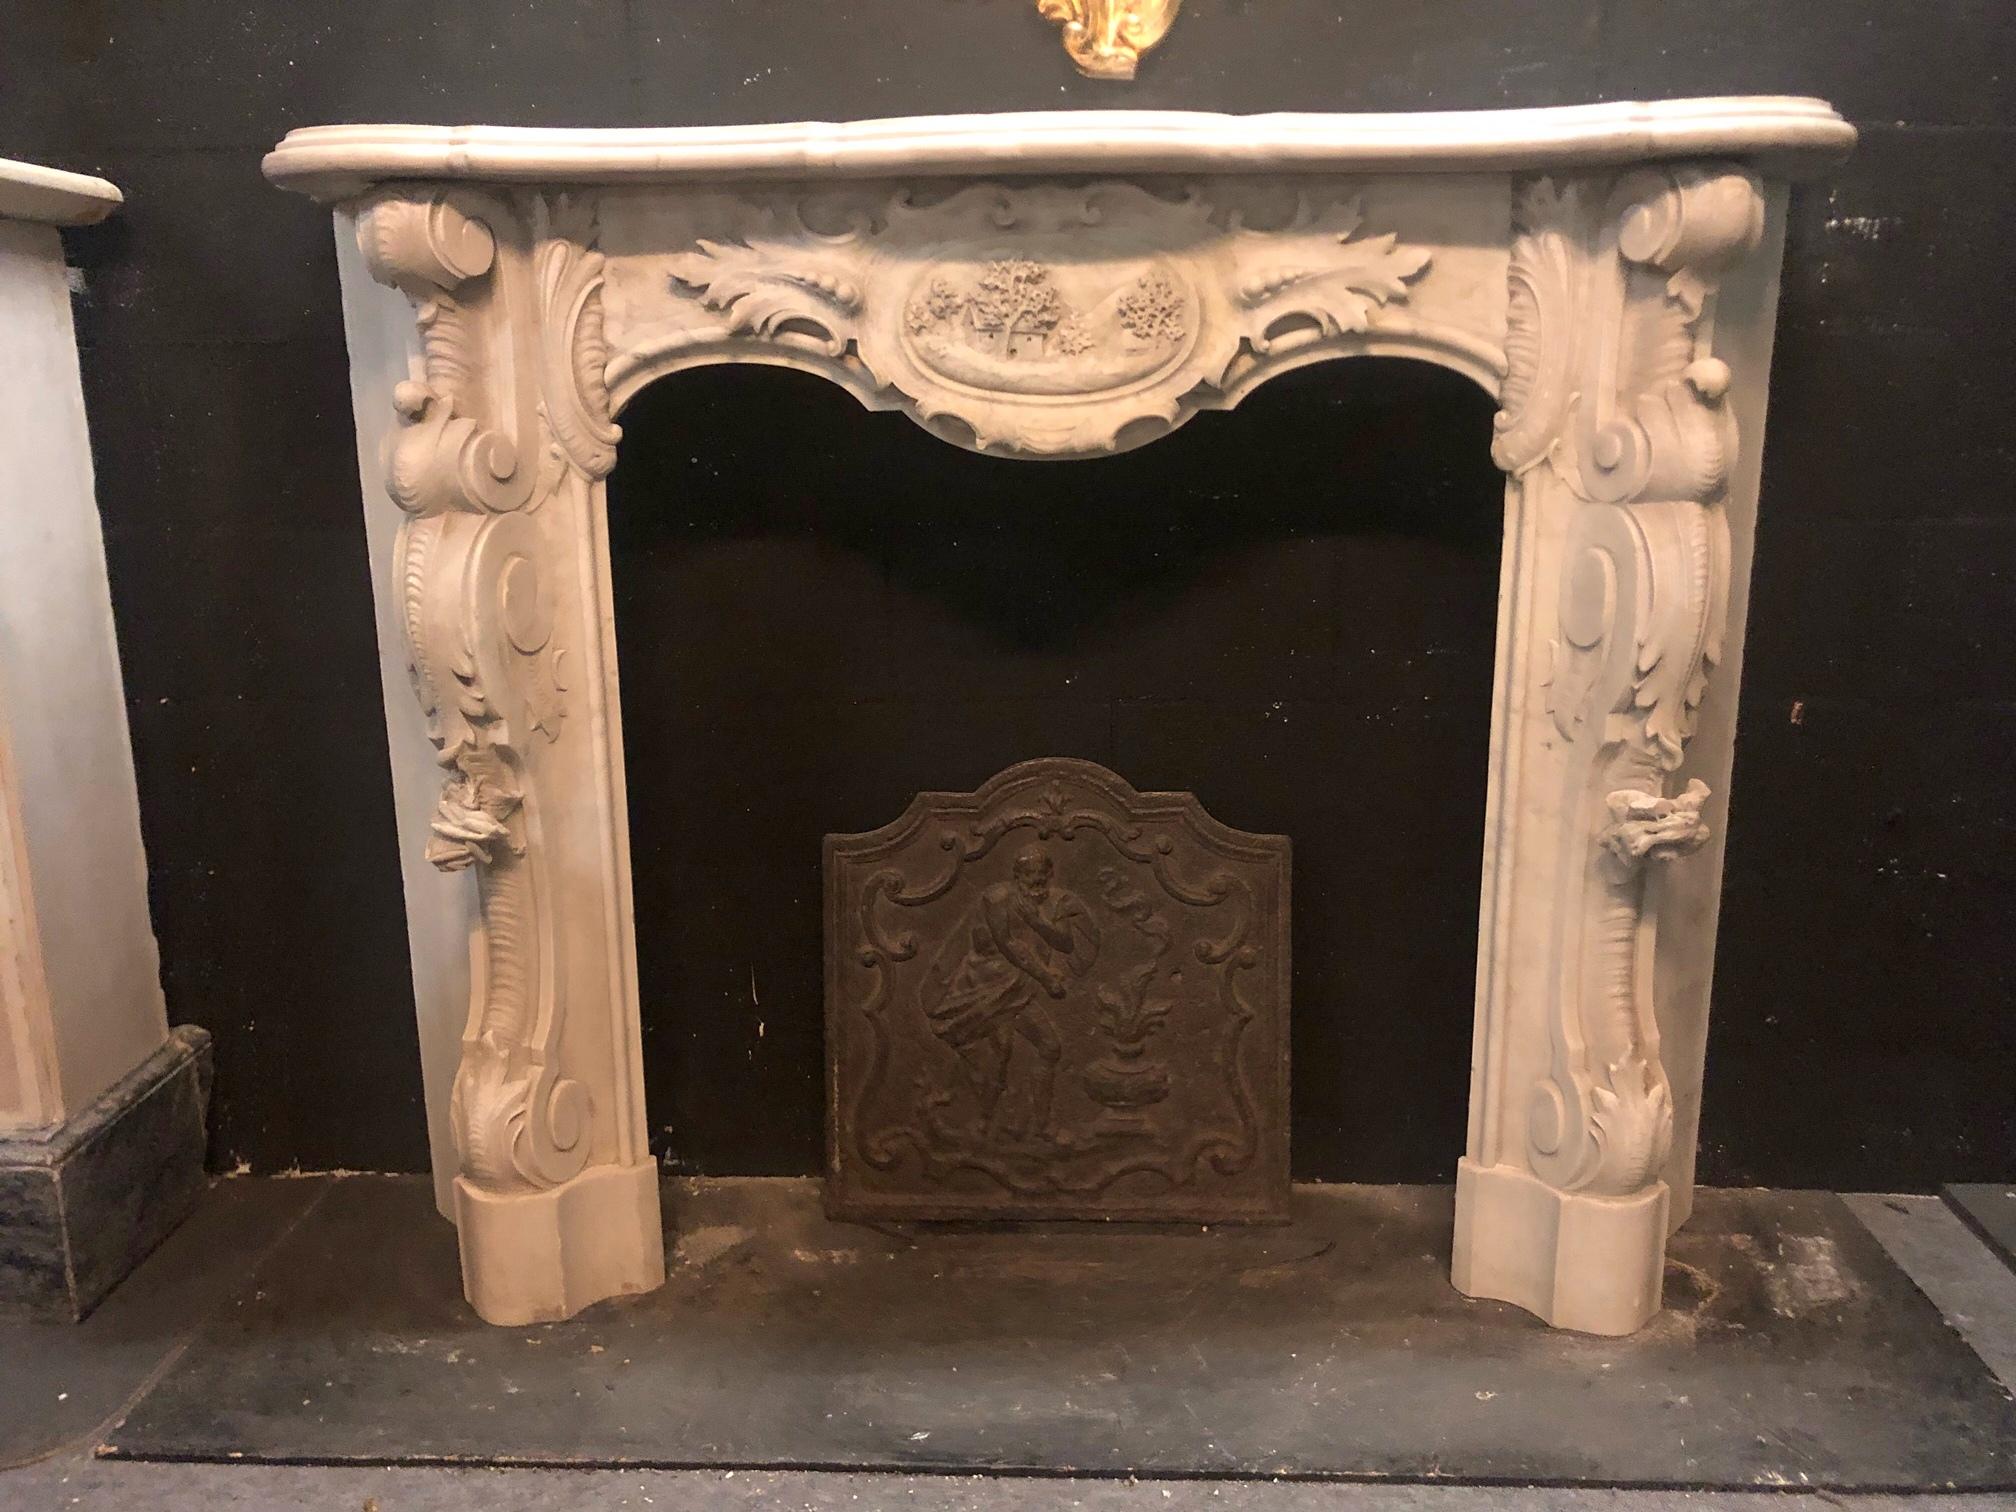 Italian Art Noveau Mantel Fireplace in White Carrara Marble, Early 1900s, Italy For Sale